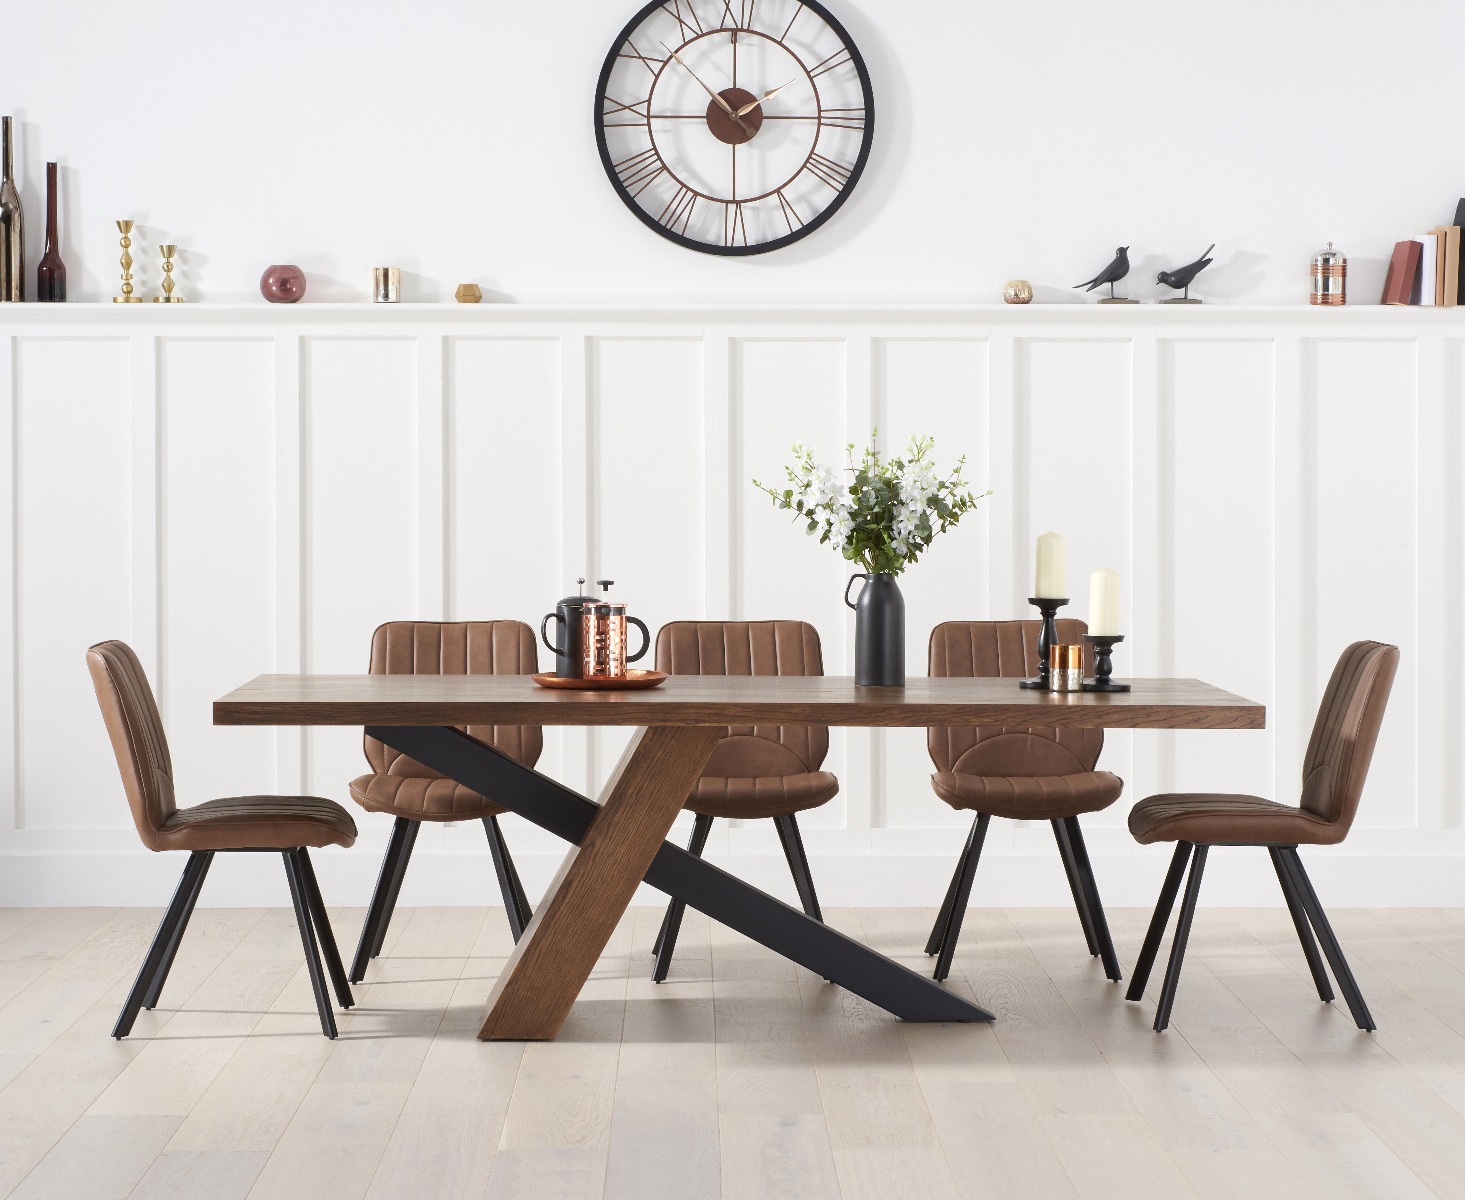 Chateau 180cm Black Leg Industrial Dining Table With 8 Brown Hendrick Faux Leather Dining Chairs